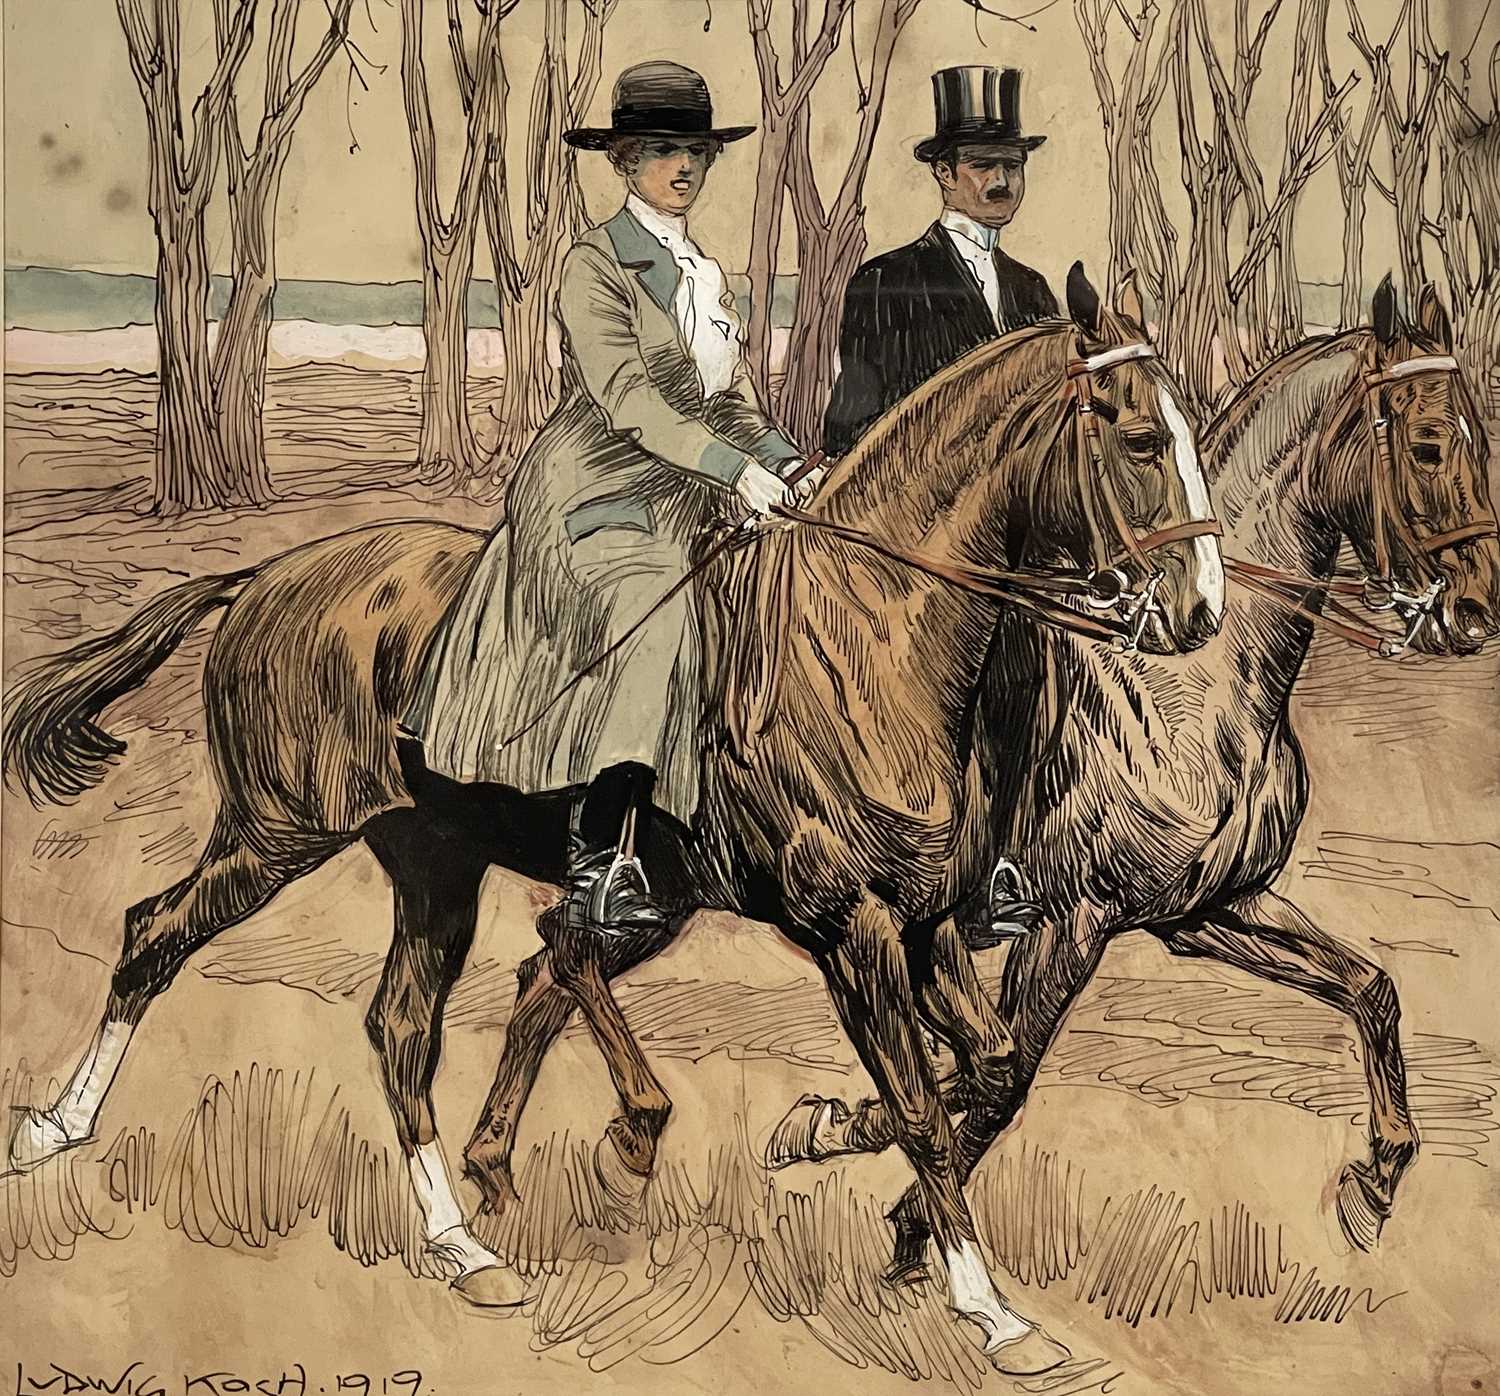 Ludwig Koch (Austrian, 1866-1934), Our for a Ride, signed and dated 1919 l.l., pen and wash